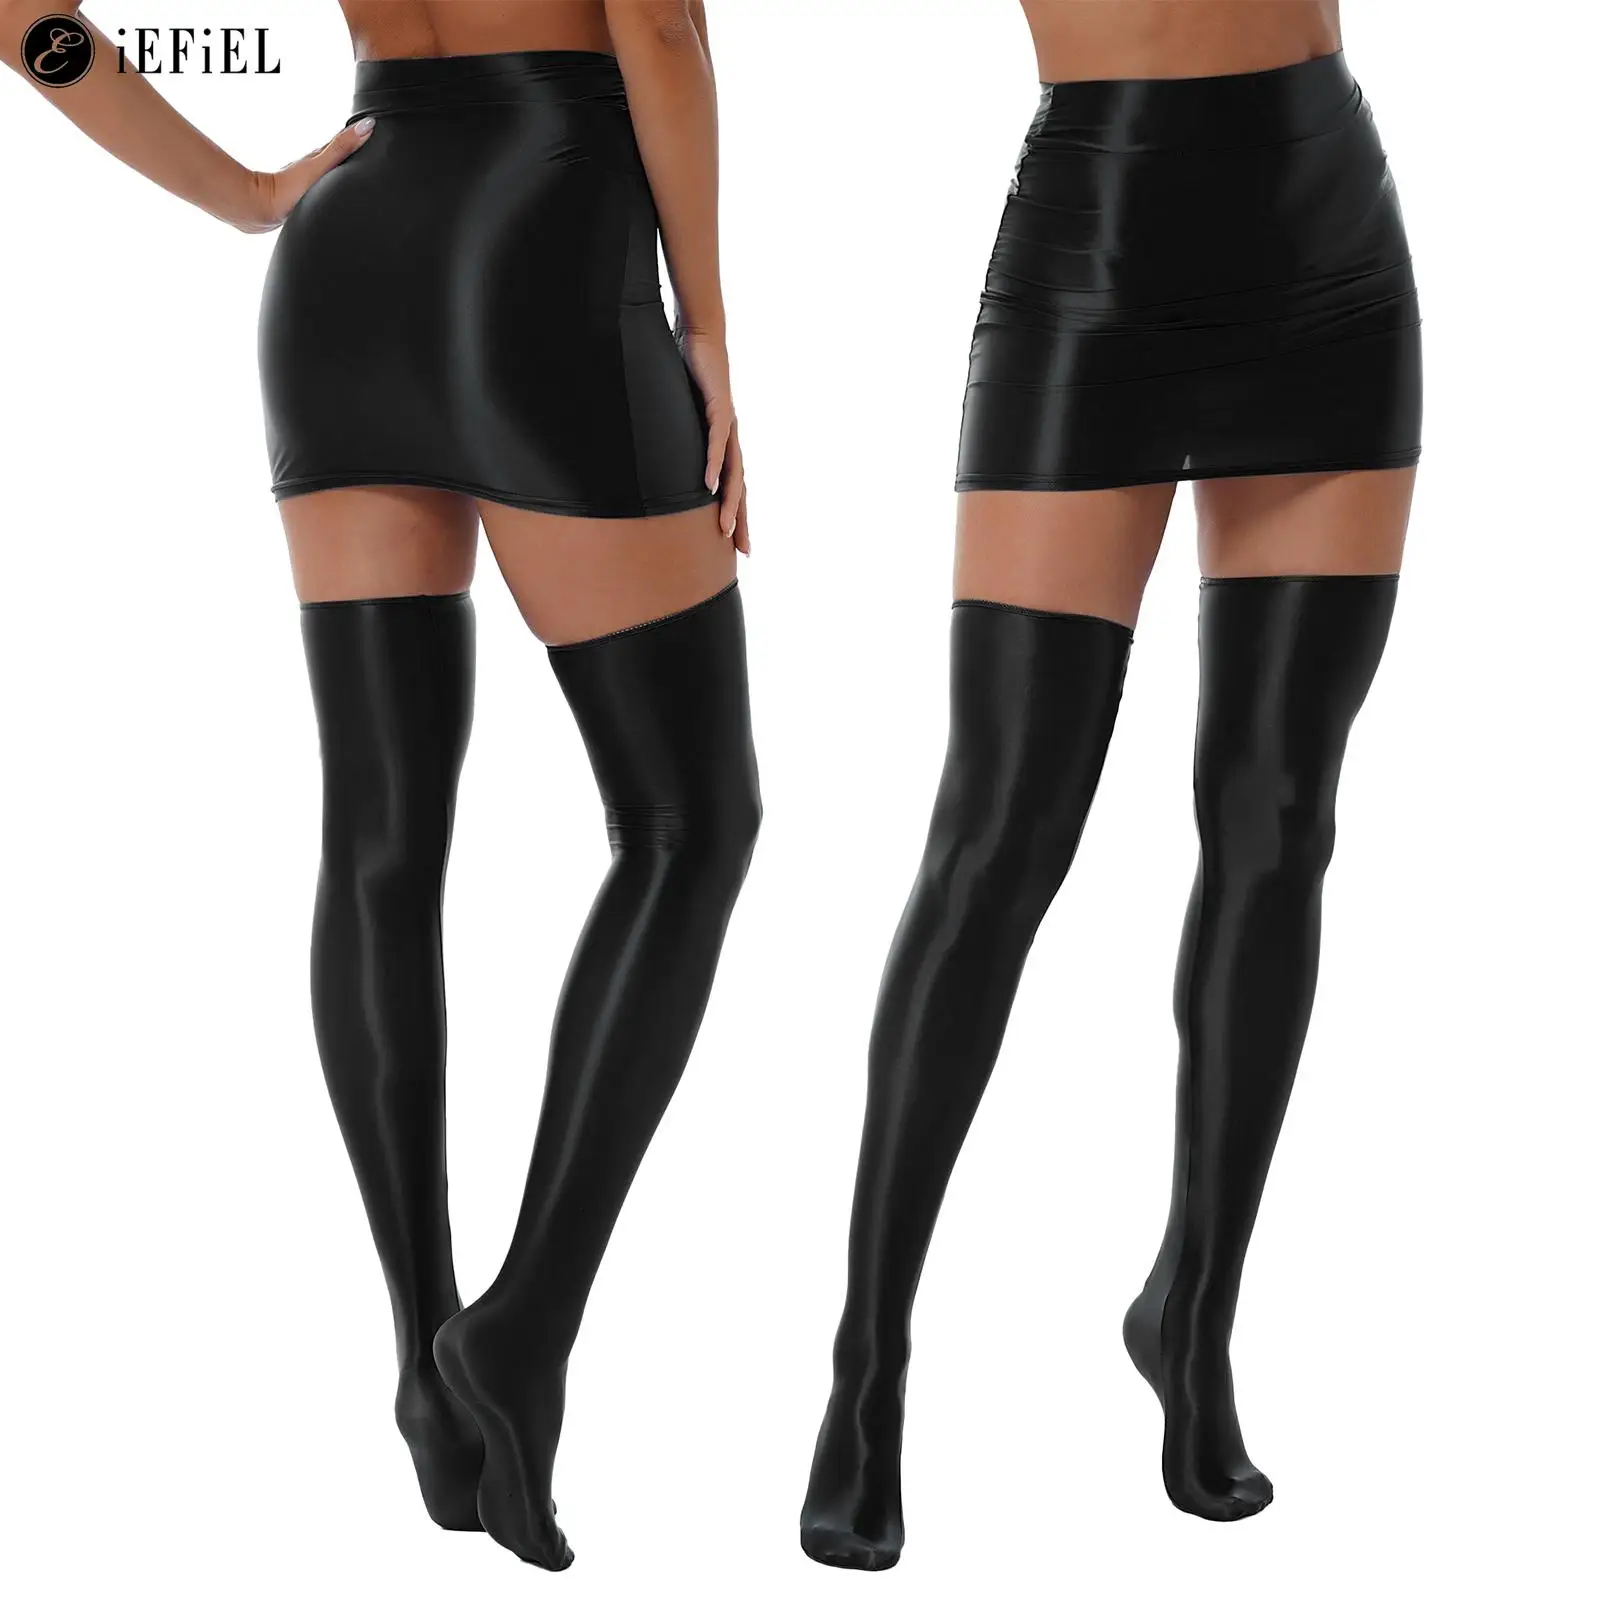 Womens Shiny Glossy High Waist Mini Pencil Skirt Bodycon with Stockings for Night Club Disco Party Pole Dancing Clubbing